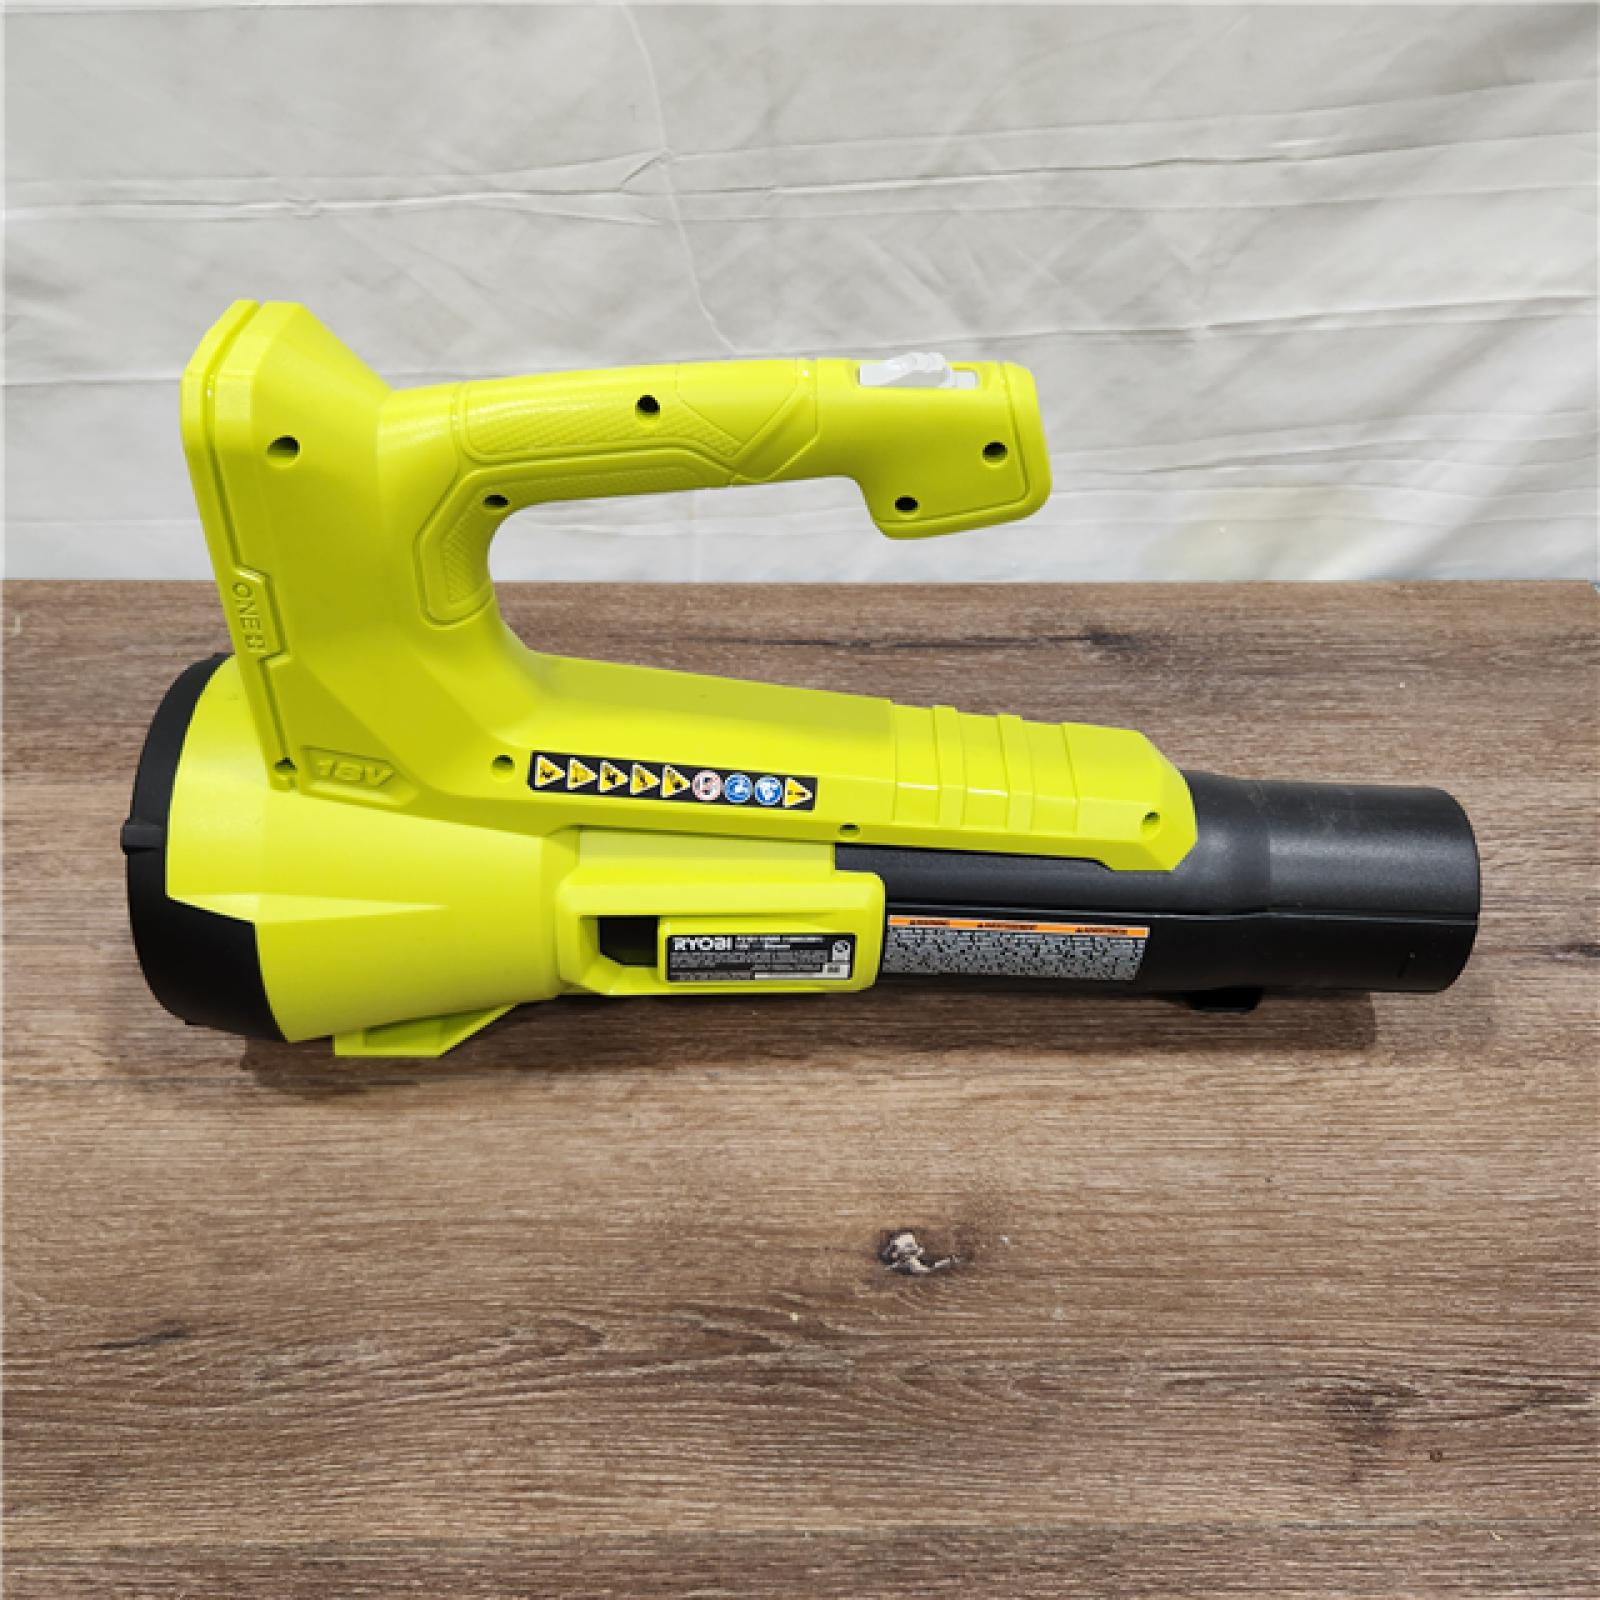 AS-IS RYOBI ONE+ 18V 90 MPH 250 CFM Cordless Battery Leaf Blower/Sweeper